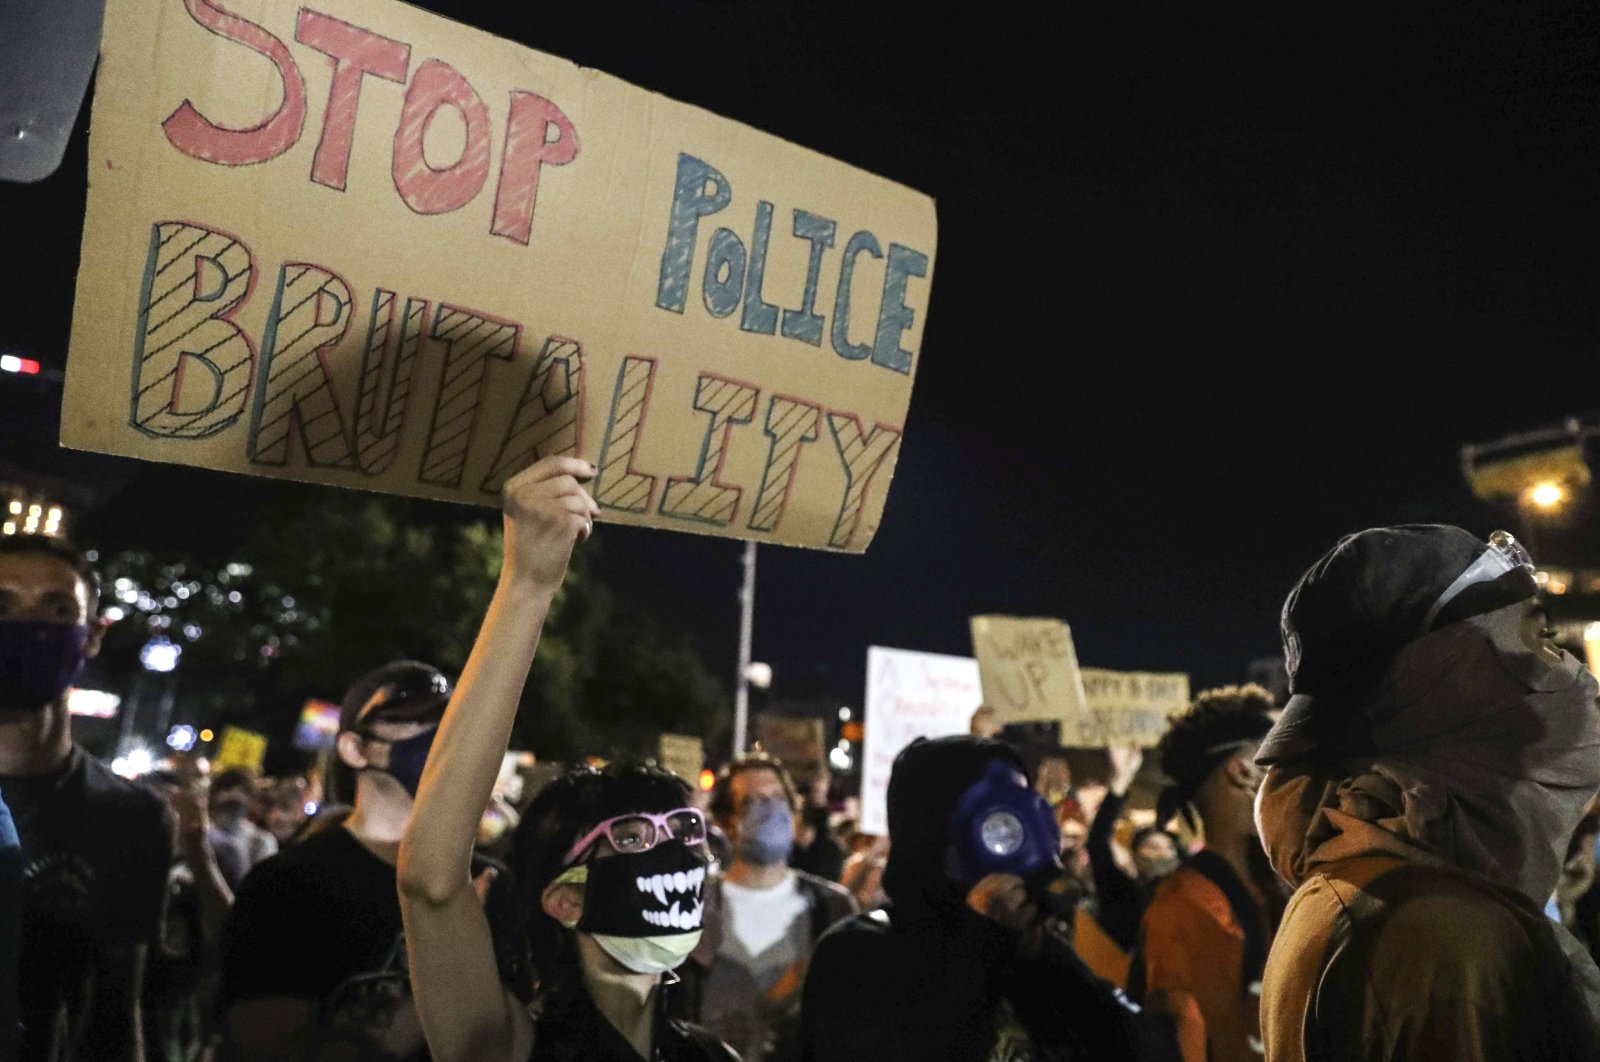 Protesters decry the death of George Floyd, Michael Ramos and police brutality against black Americans in front of the Austin Police Department headquarters in Austin, Texas, U.S., June 5, 2020. (Austin American-Statesman via AP)